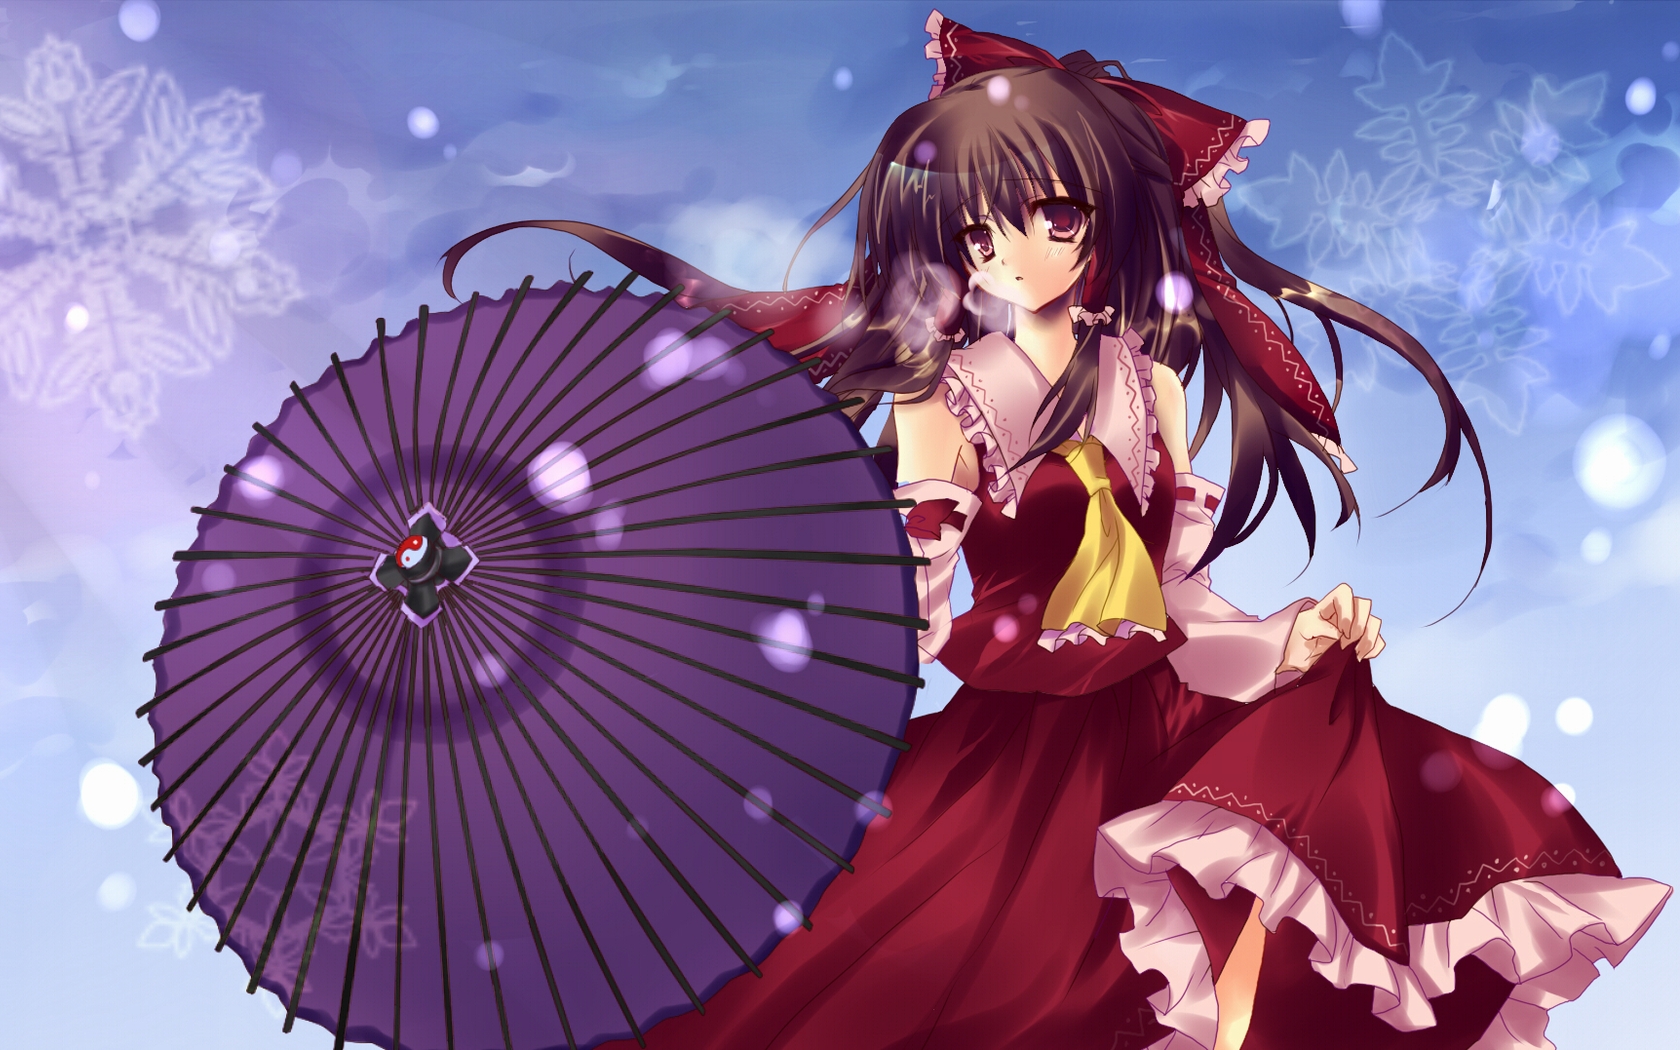 Download-project-shrine-maiden-hd-anime-wallpaper-anime-wallpaper